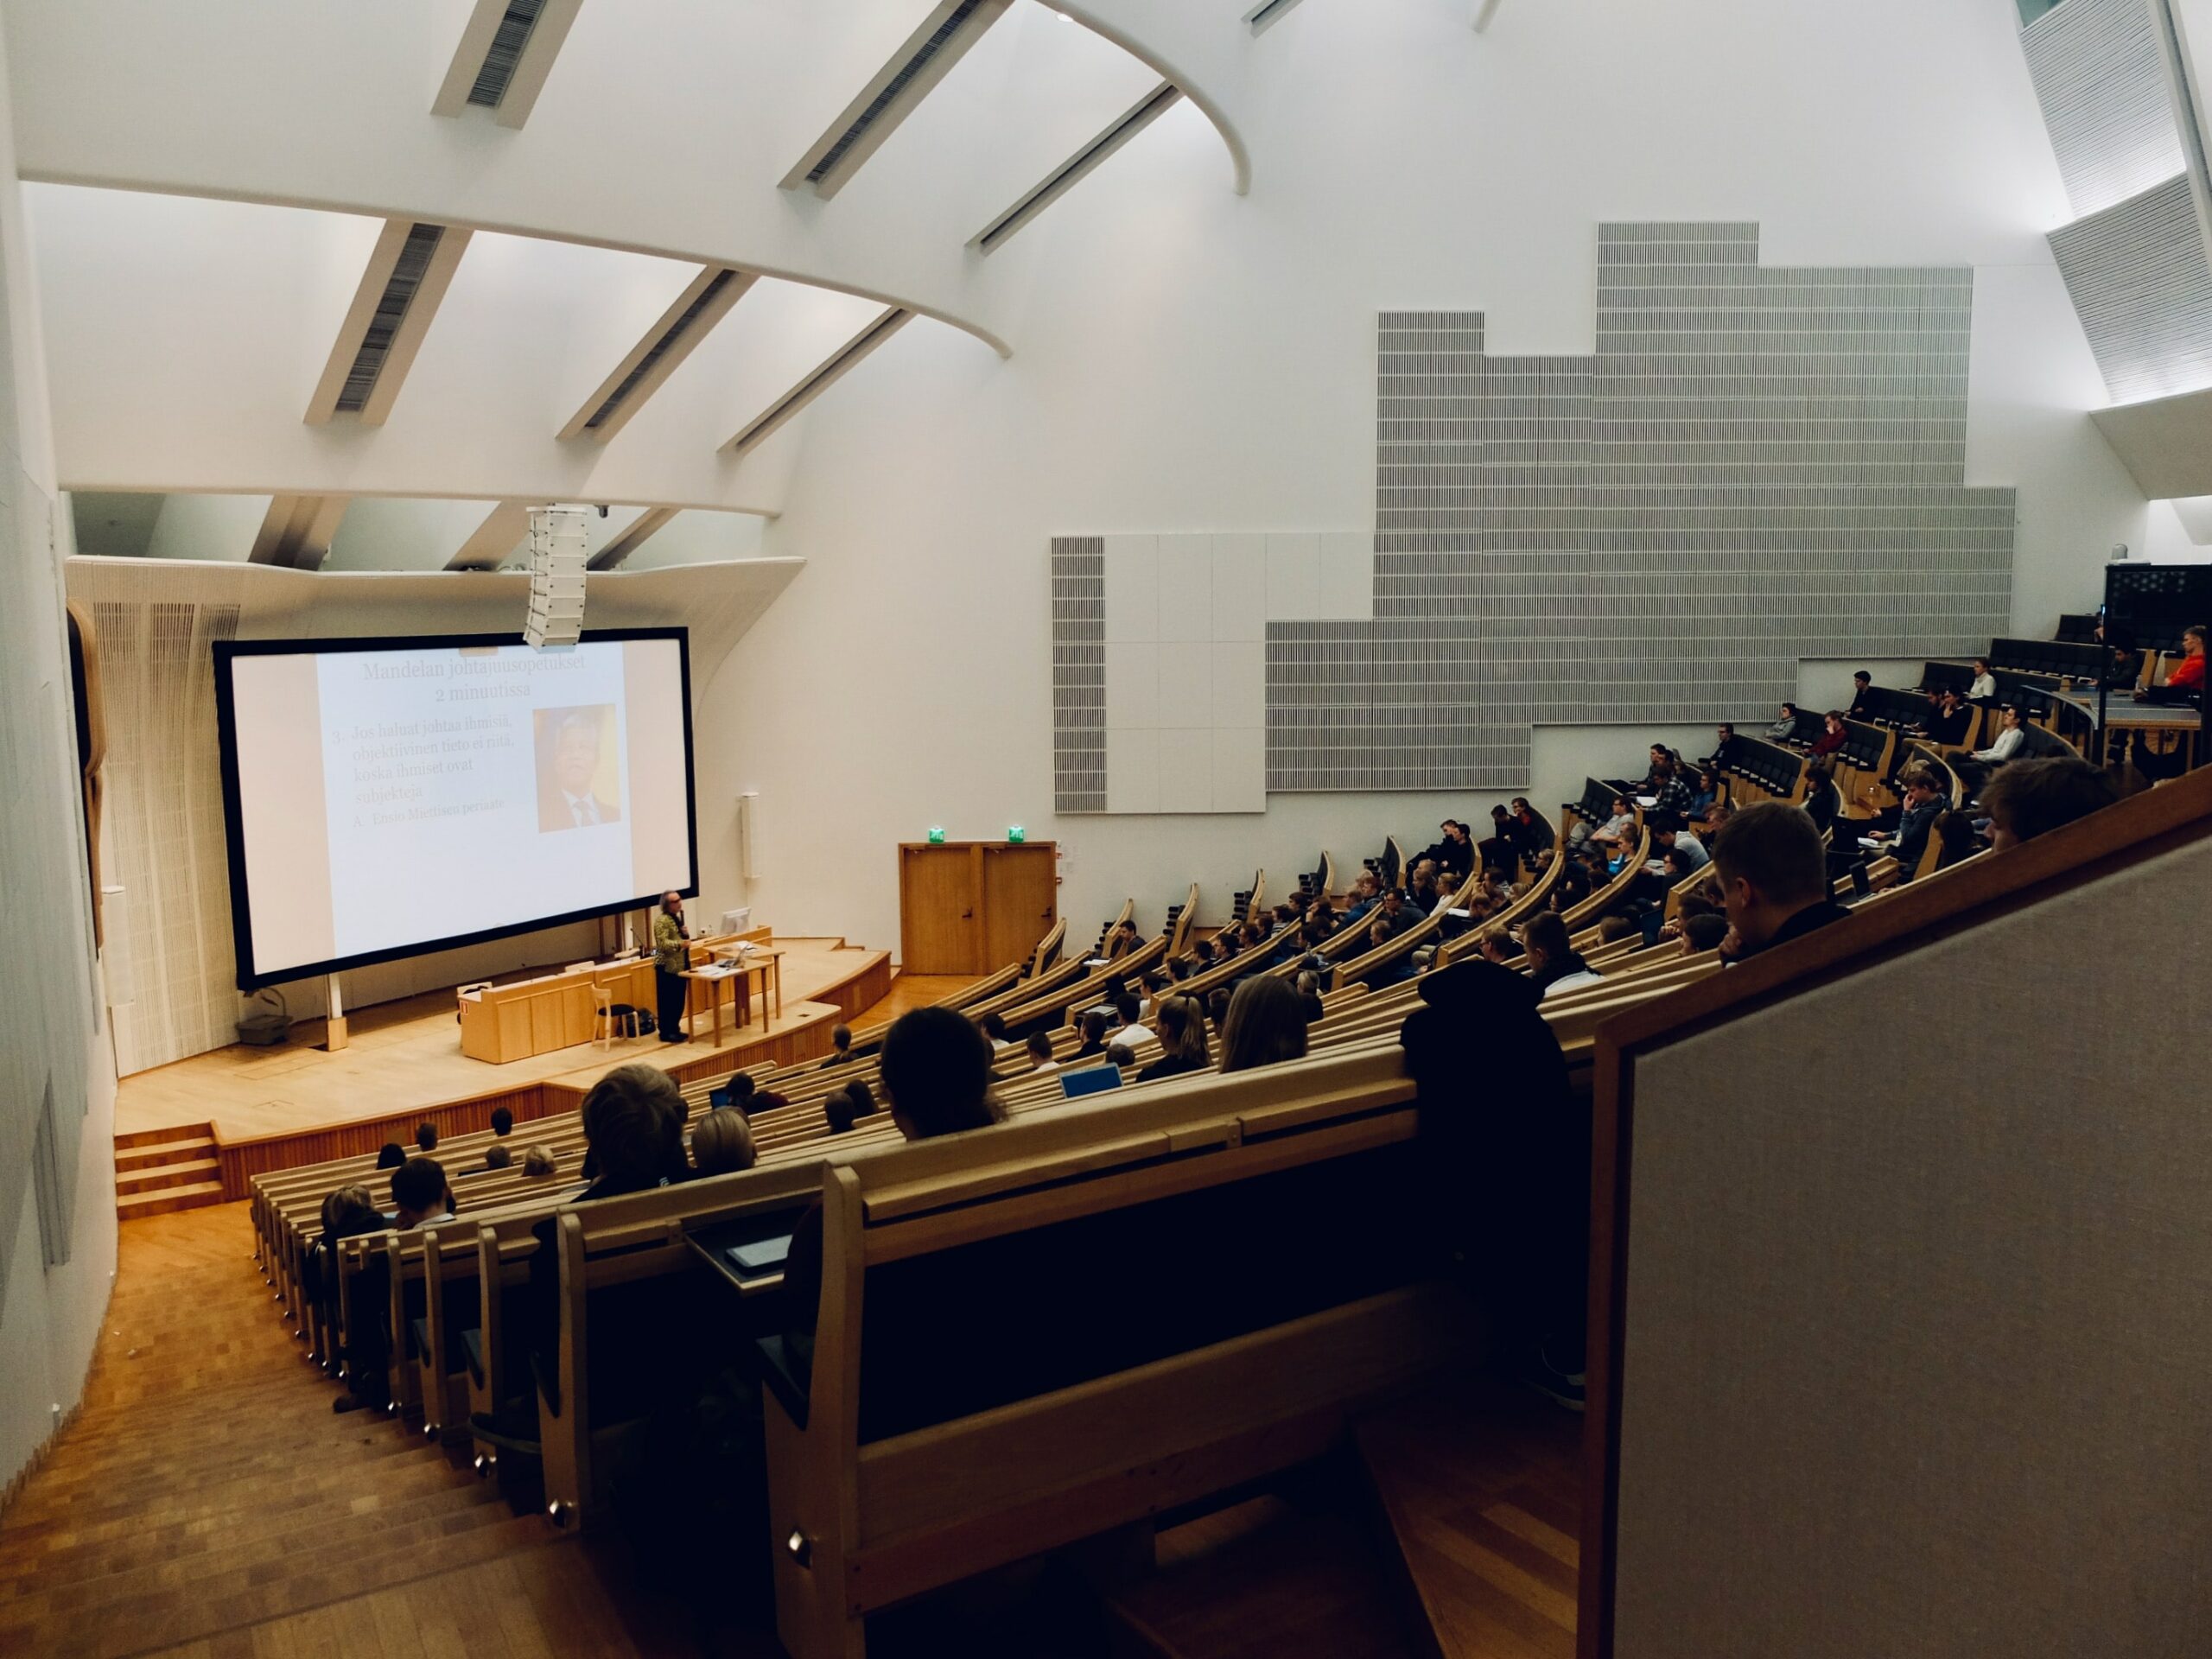 The photo is of the inside of a lecture hall. The lecture hall is full of students, attention turned to the front of the room where the professor is delivering a lecture presentation.